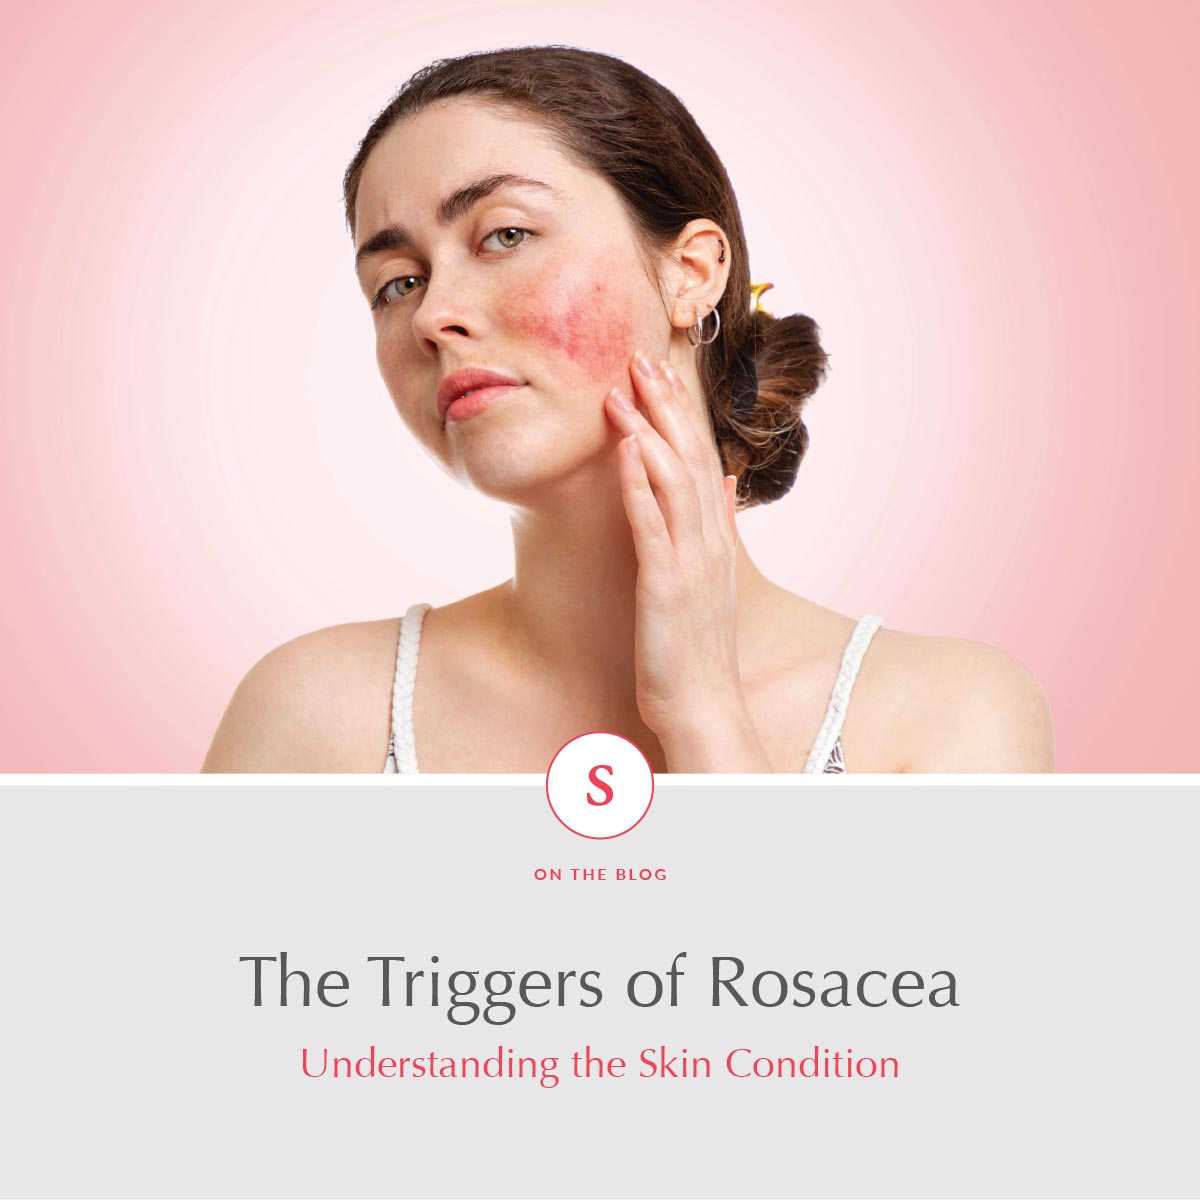 The Triggers of Rosacea